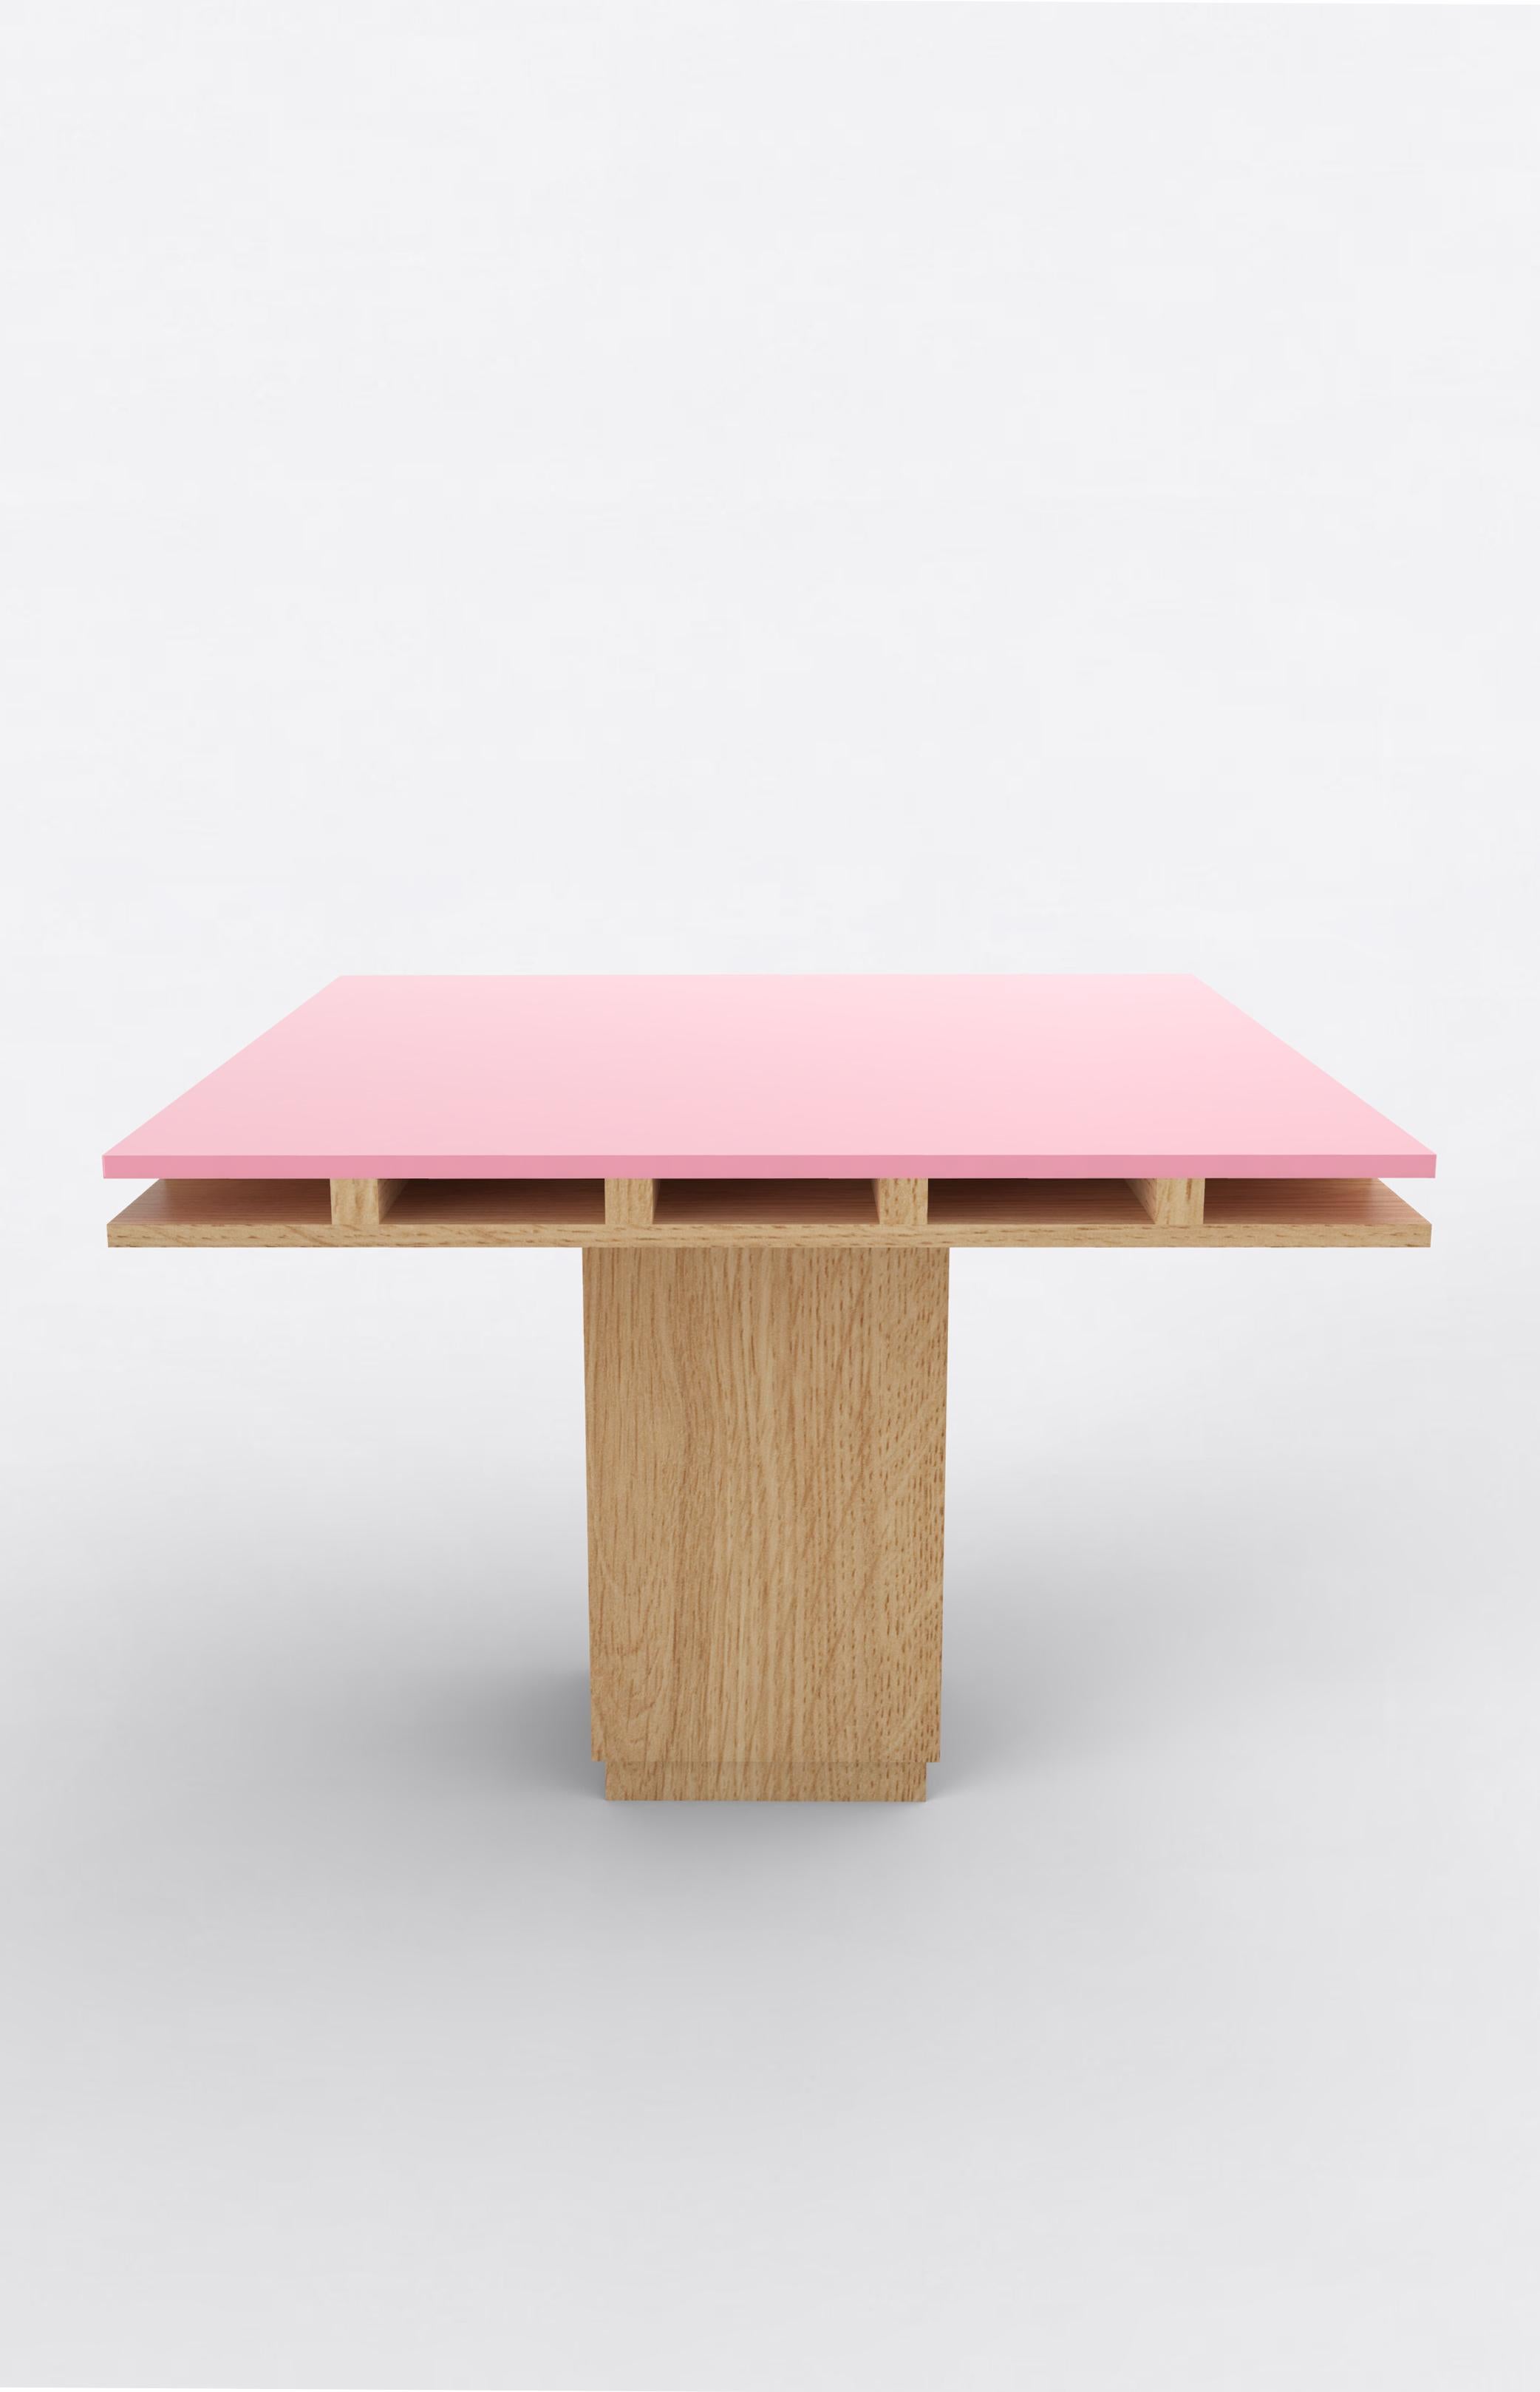 Orphan work 101C Dining Table, 2020
Shown in oak and color
Available in natural oak with painted top. 
Colors available: pink, mint, yellow, blue and brown.
Measures: 60” L x 60” W x 30” H
Dimensions available:
42” L x 42” W x 30” H
60” L x 60” W x